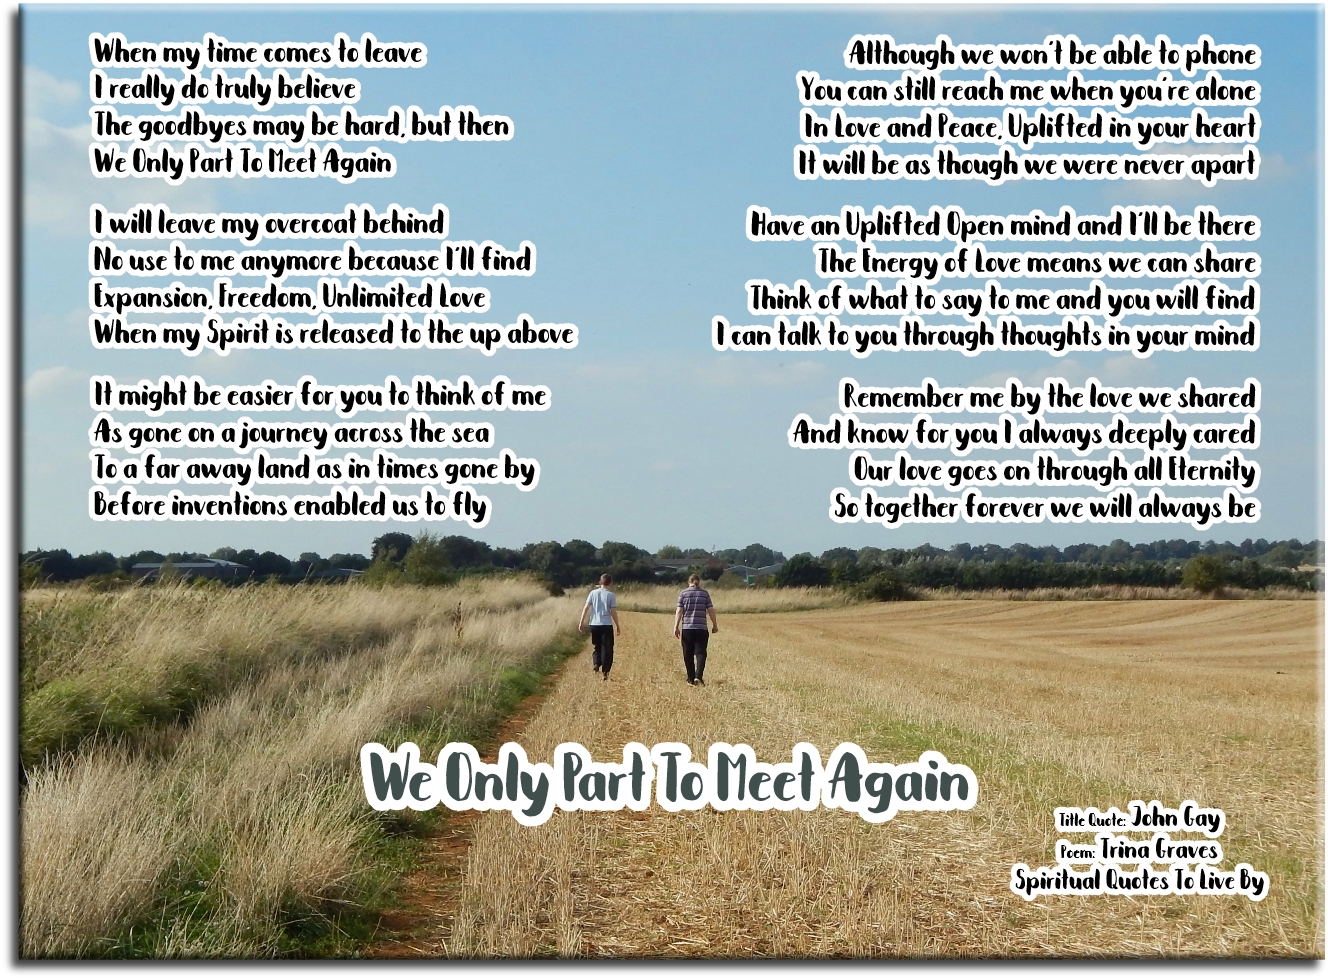 We Only Part To Meet Again - sympathy poem by Trina Graves of Spiritual Quotes To Live By